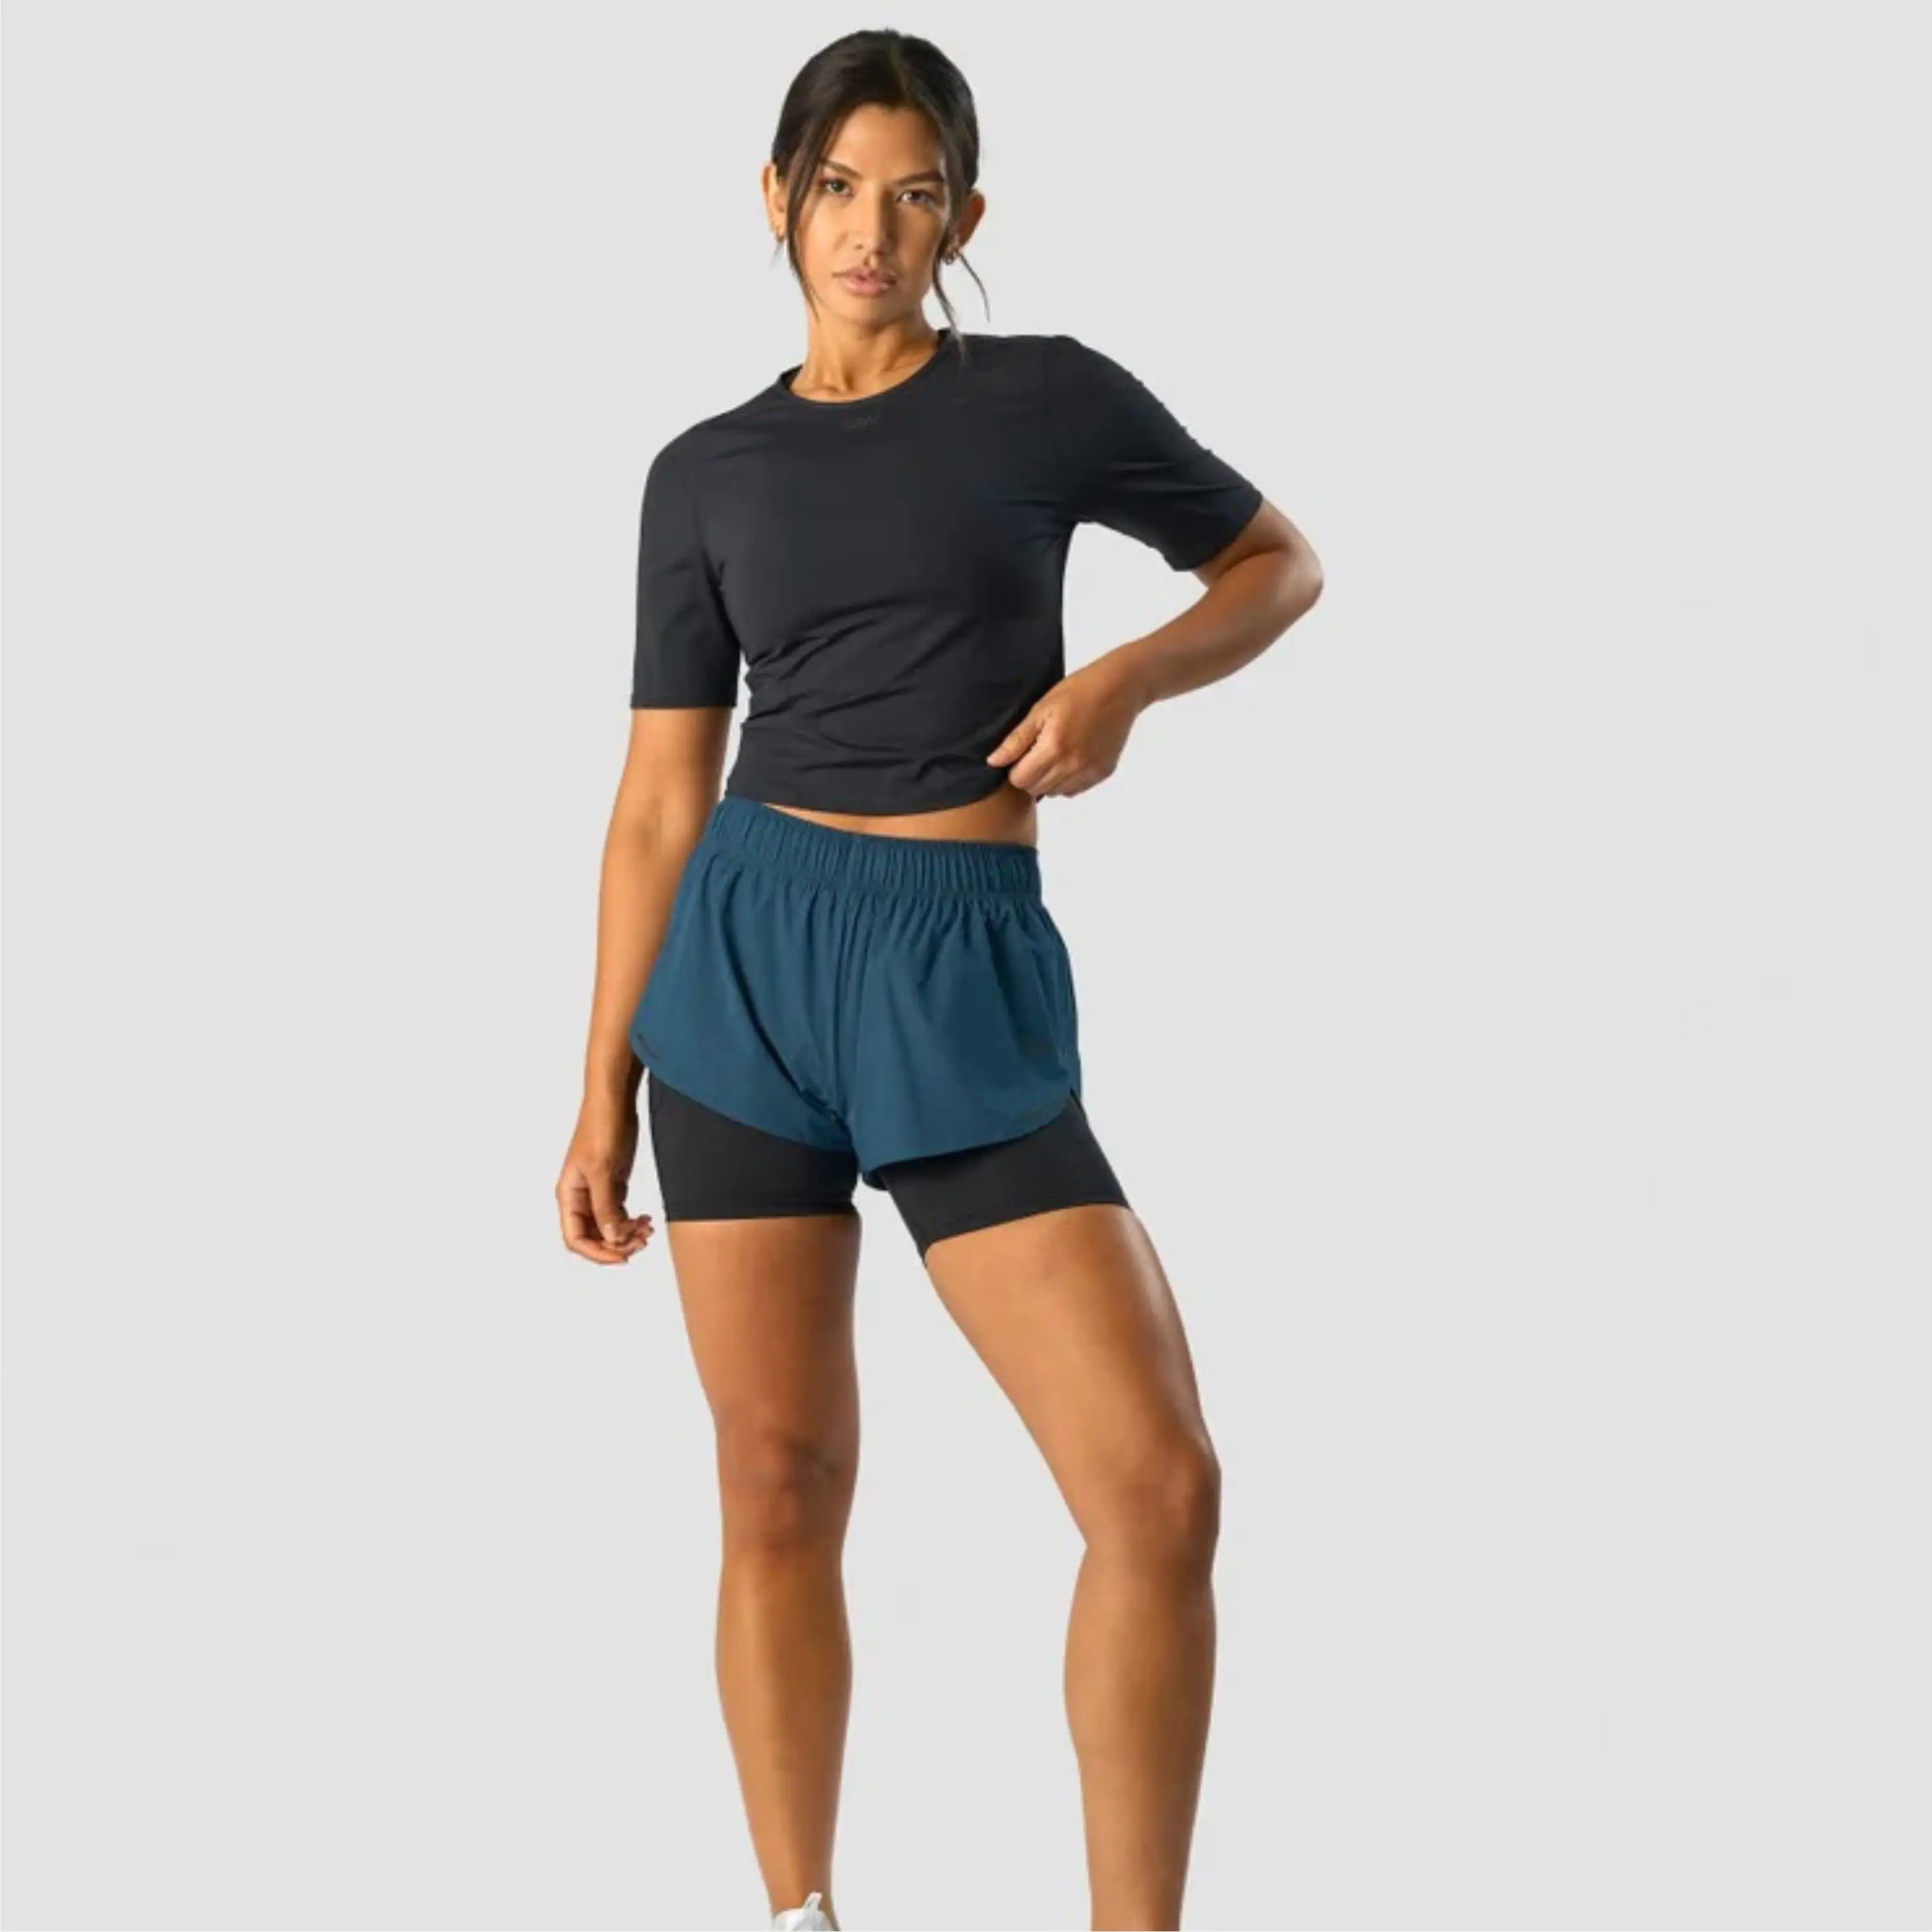 Women's 2-in-1 Gym Shorts with Inner Liner - Supportive and Flexible, Ideal for All Types of Exercise and Sports